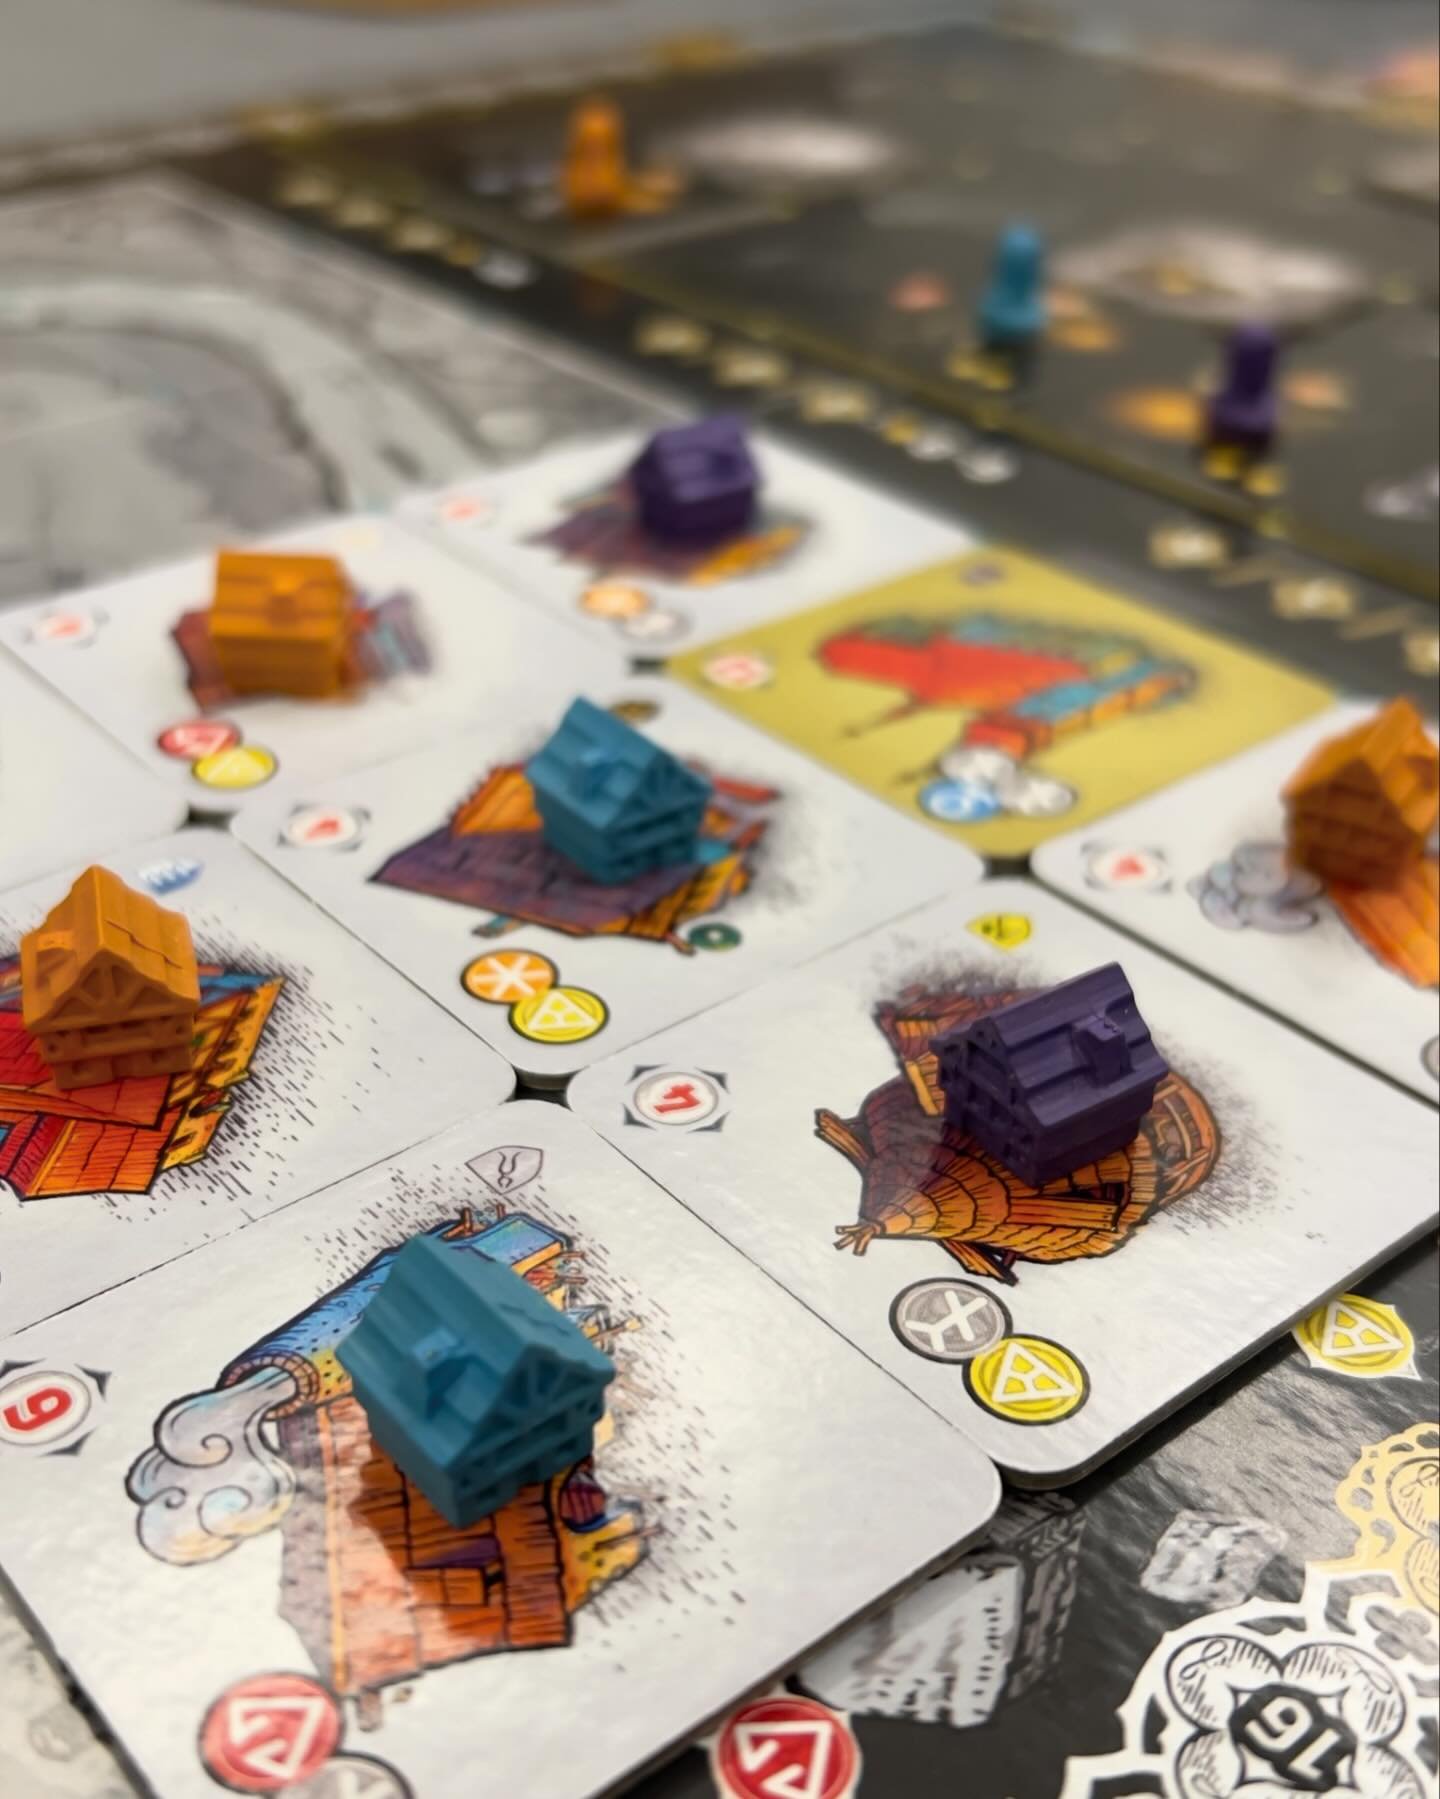 🇵🇹⬇️//🇬🇧 Kutn&aacute; Hora was one of our most anticipated board games last year. Did it meet all our expectations? 🧐
.
It certainly did, even exceeding them to the point of making our top games of 2023 list. We hope to play it again in the near